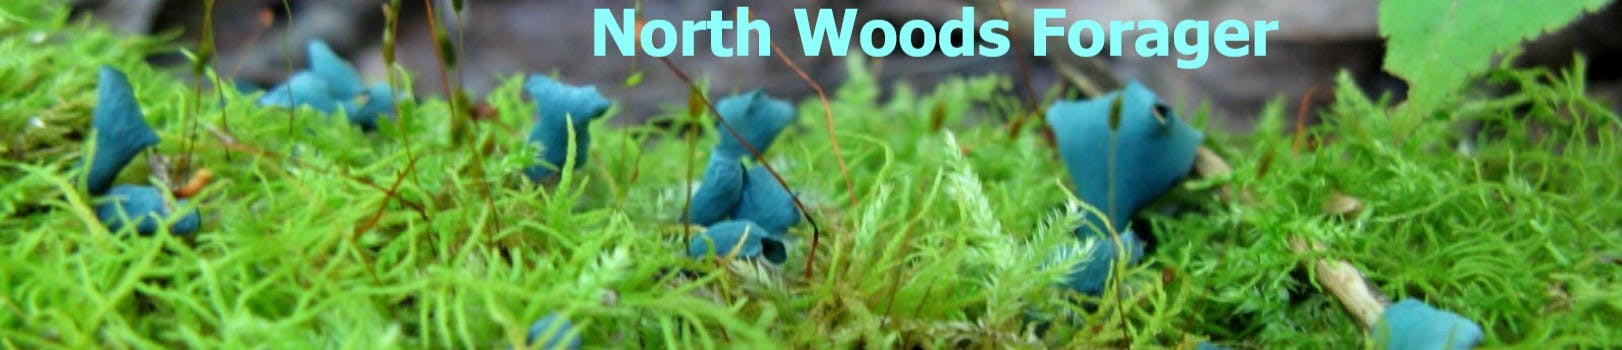 North Woods Forager's banner